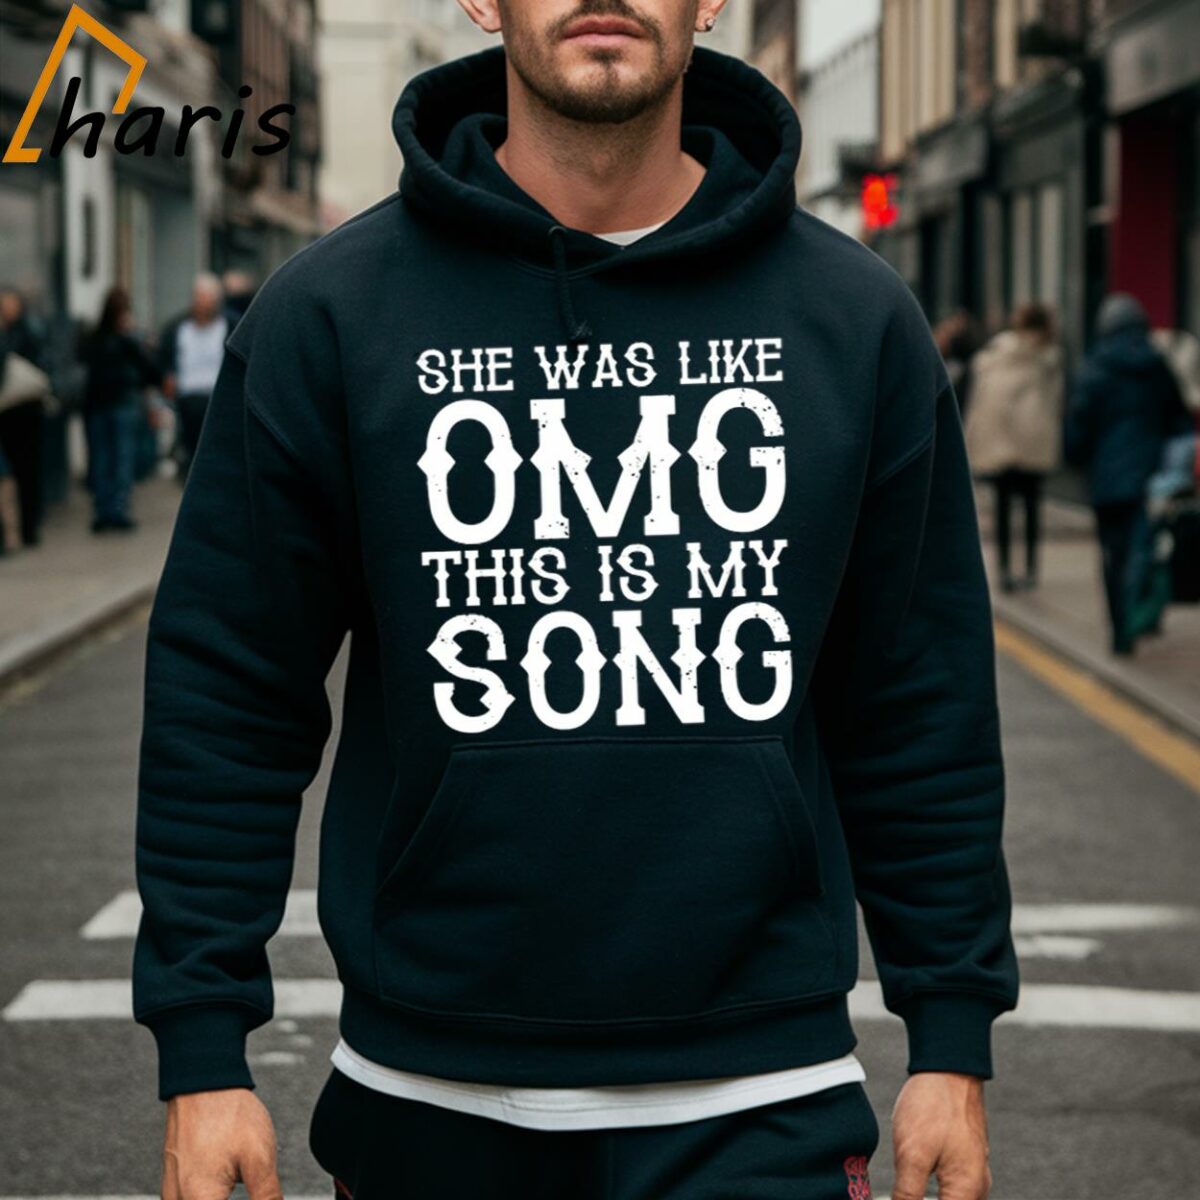 She Was Like Omg This Is My Song Luke Bryan Play It Again Country Music Song Lyrics Fan T shirt 5 Hoodie